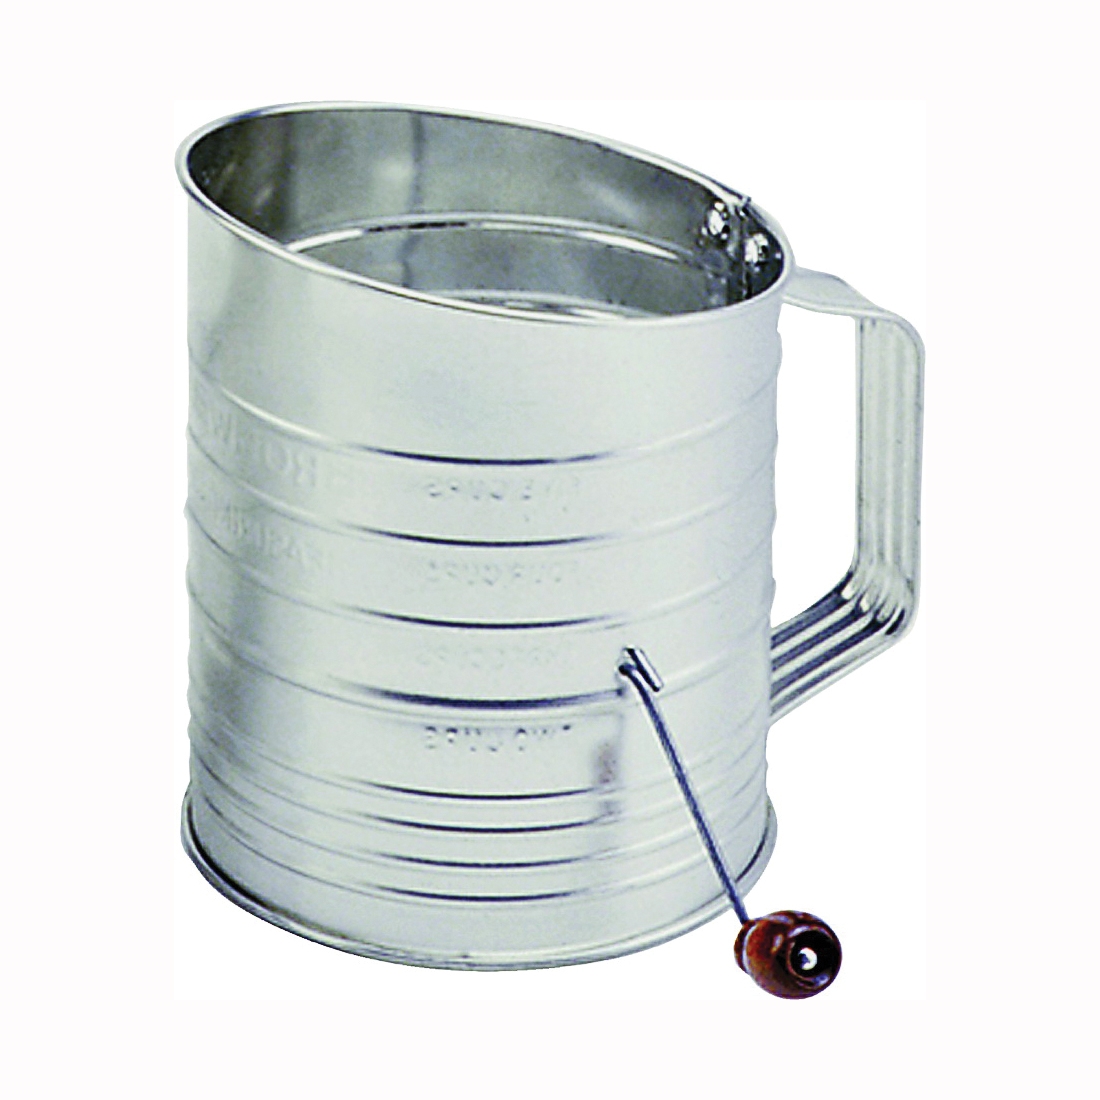 Norpro 137 Hand Crank Sifter, 40 oz, 5 in H, Stainless Steel